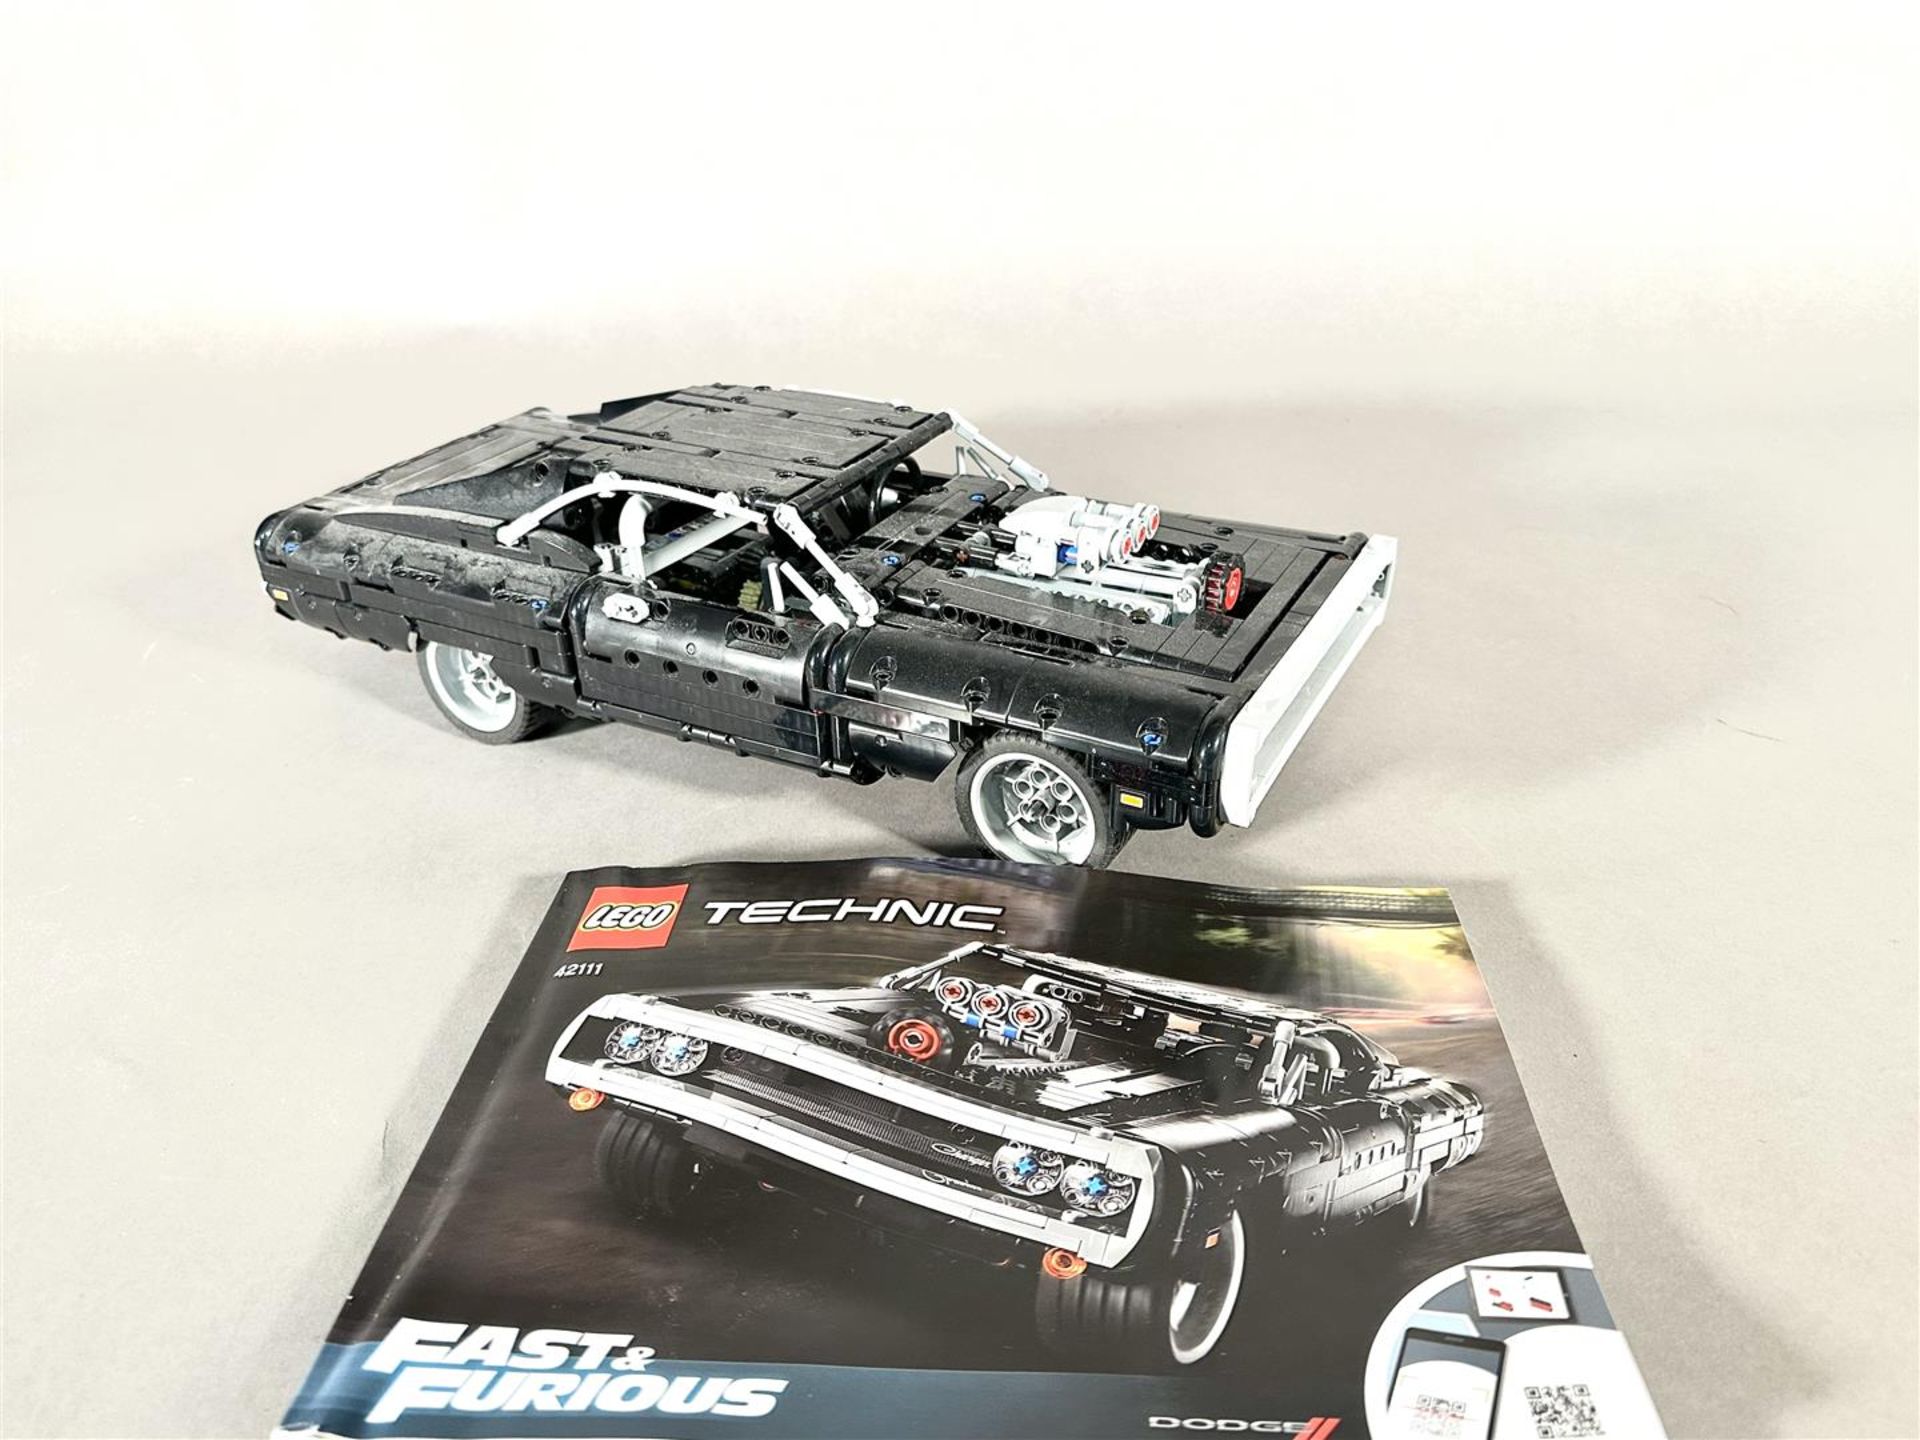 LEGO - Technic 42111 - Fast & Furious - Dom's Dodge Charger - Image 9 of 9